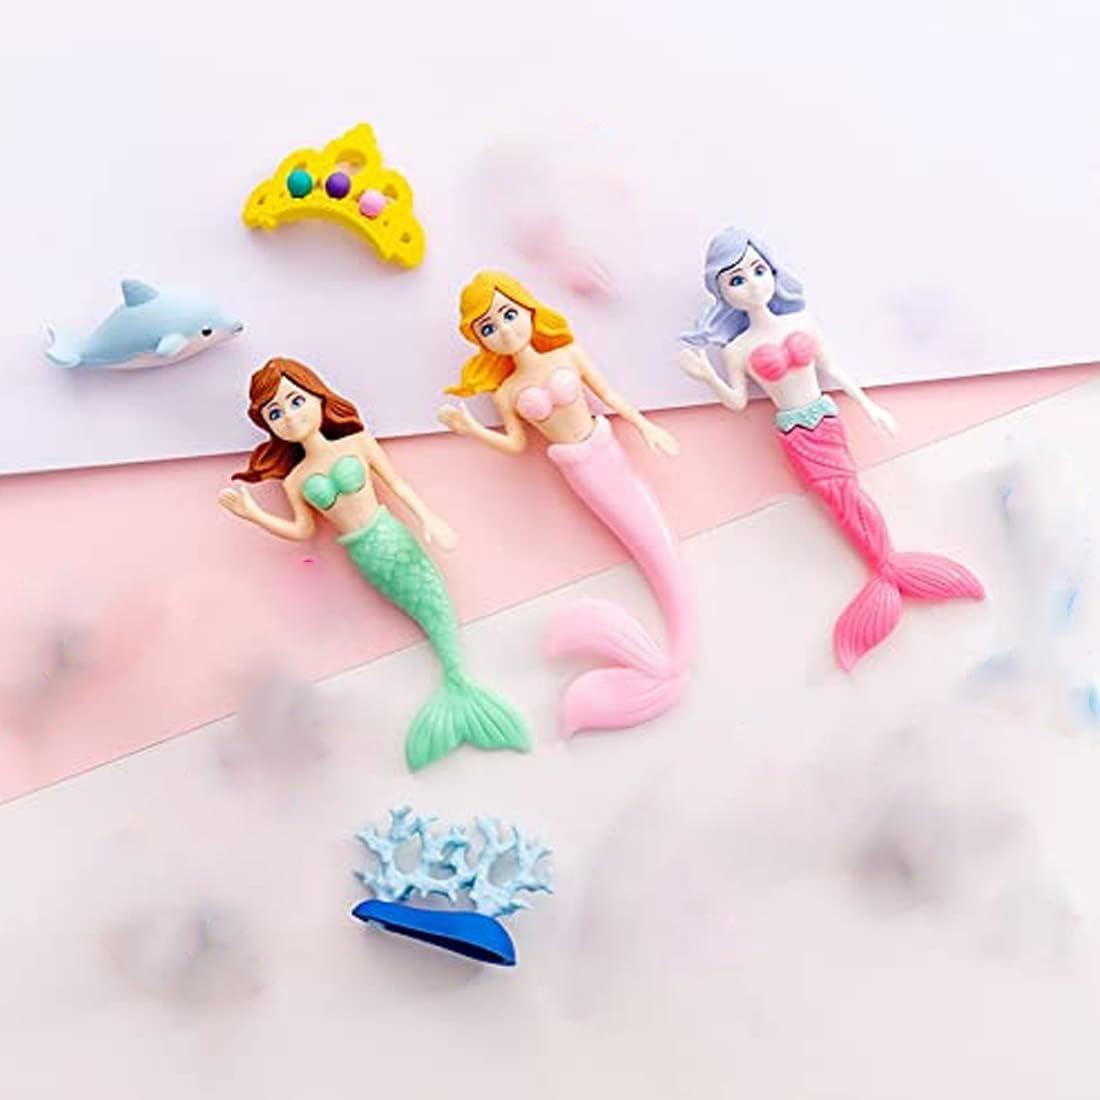 Haoser Colorful Mermaid Theme Stationary for Boys & Girls with 4 Cute Adorable Characters Water Animal & Creatures, Fancy Eraser Set Birthday Party Return Gift for Kids (Multicolor) - Haoser